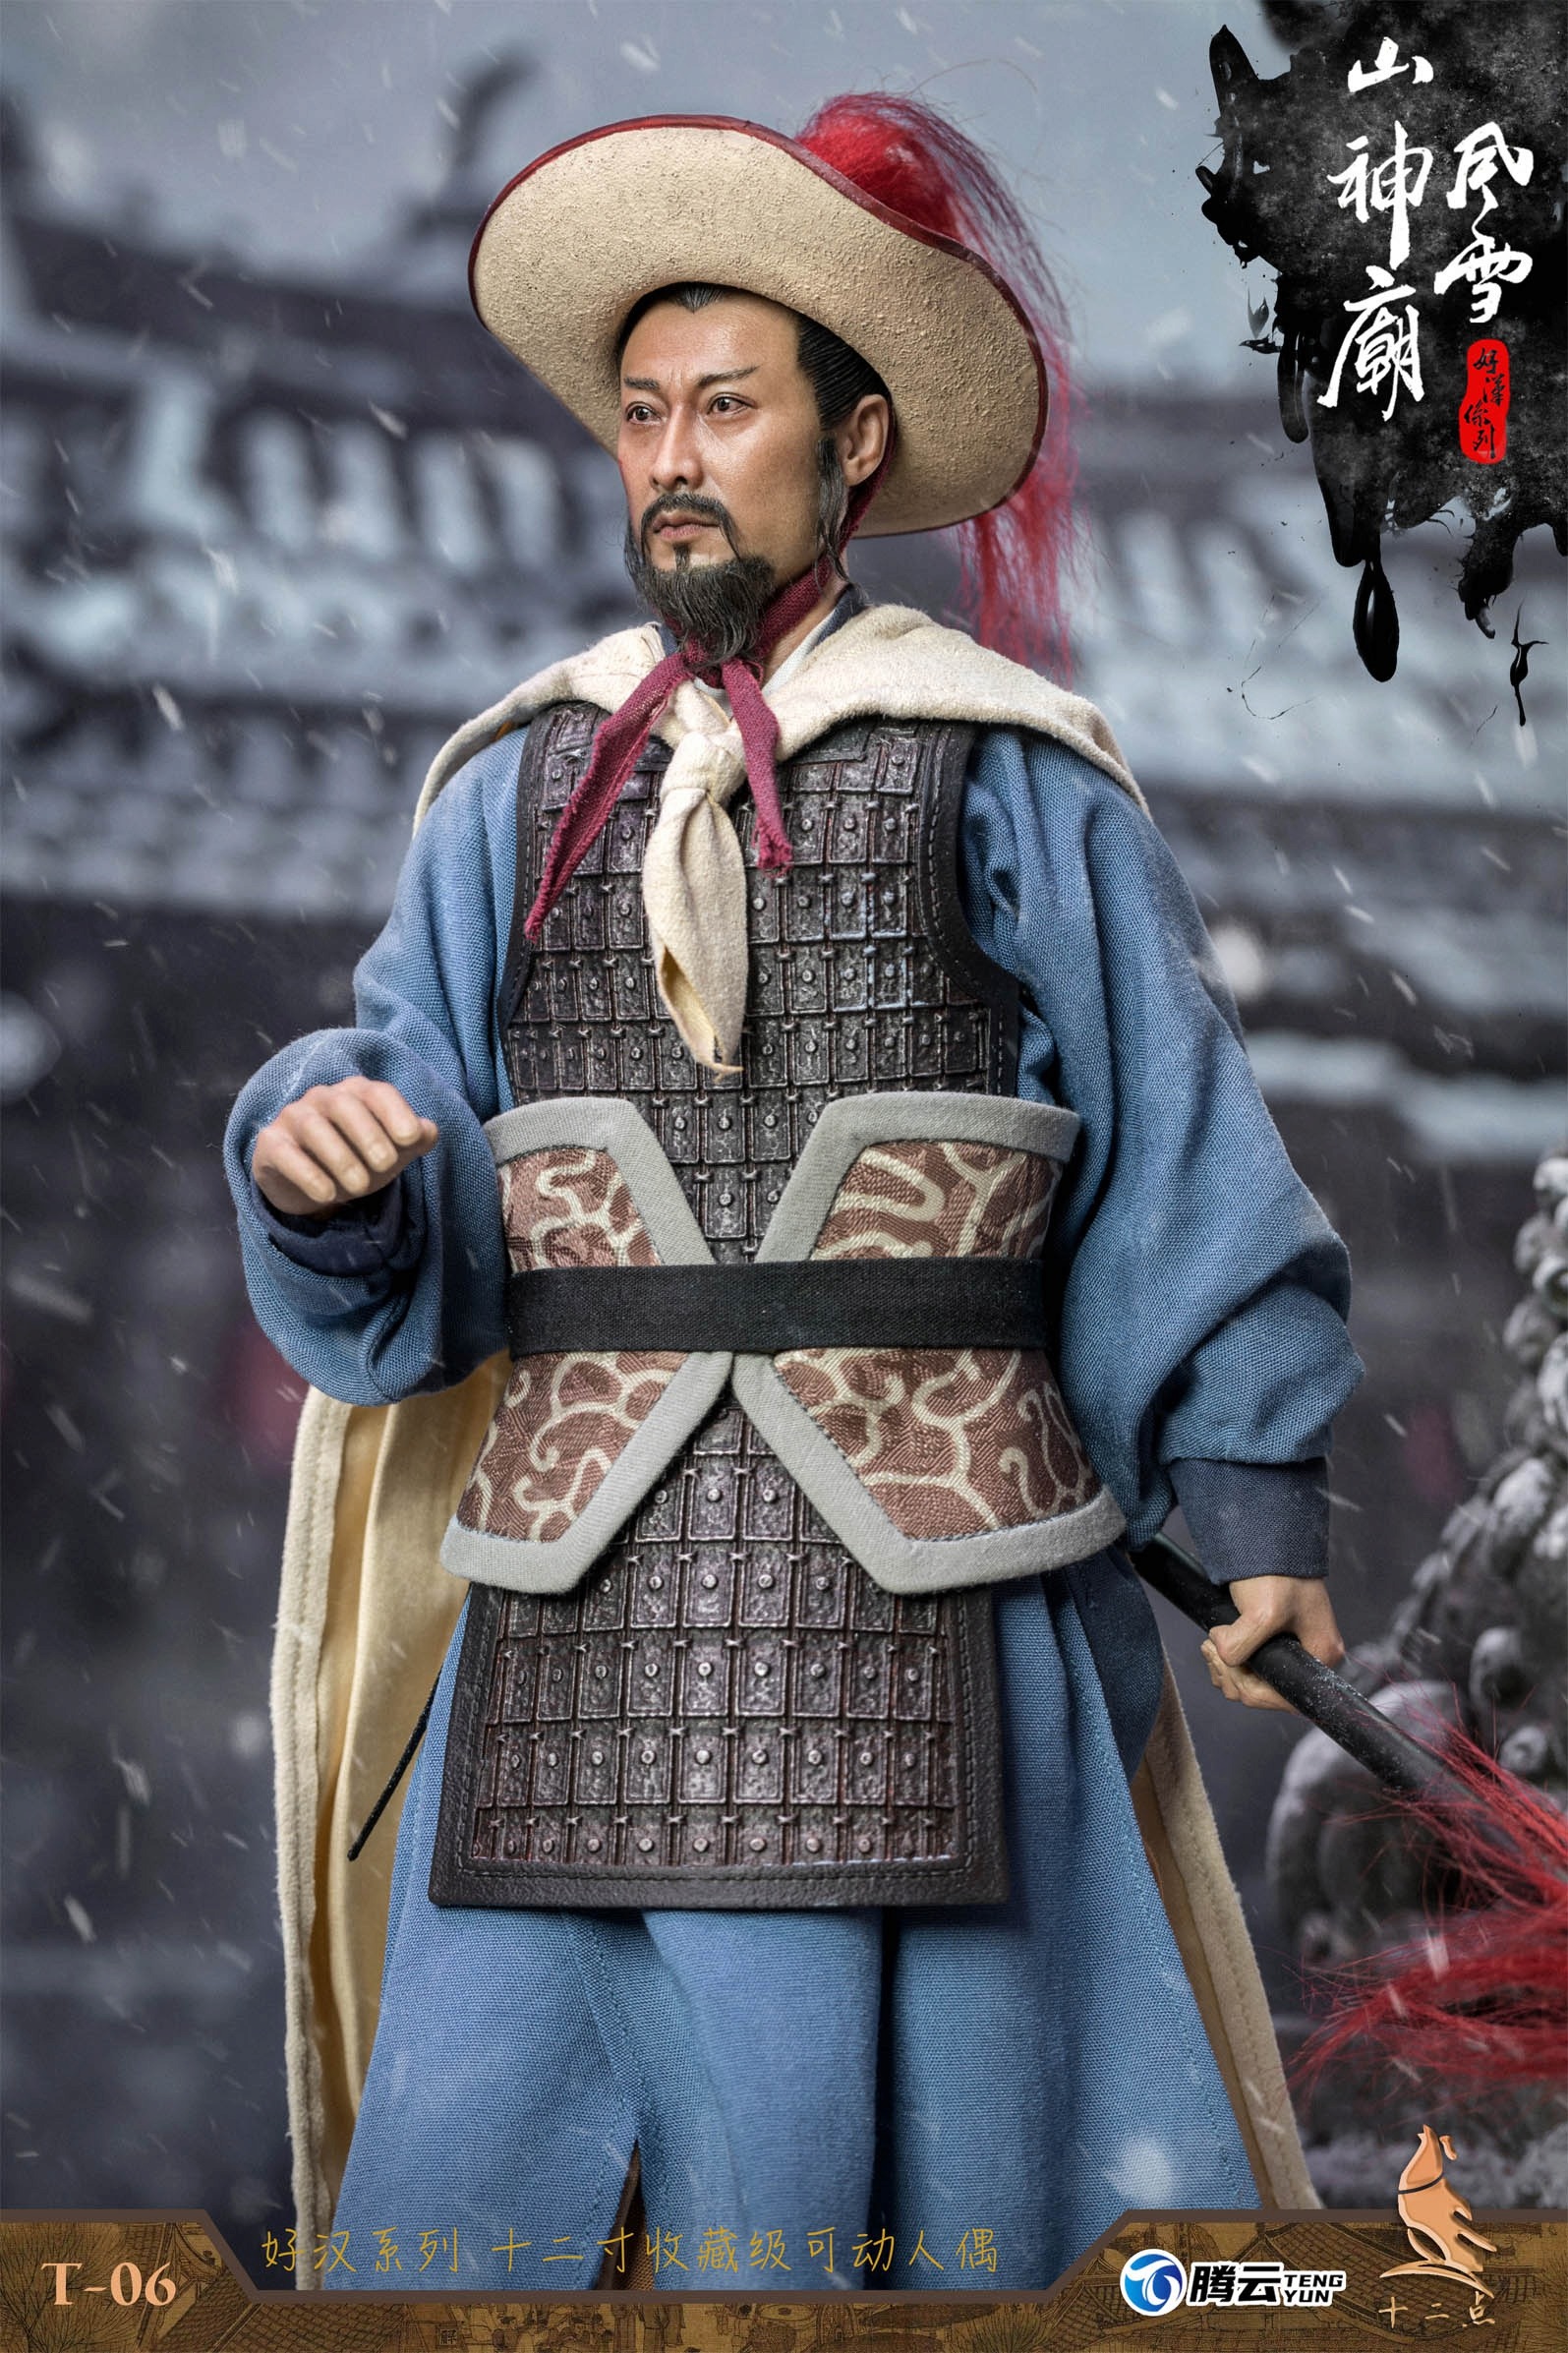 NEW PRODUCT: Twelve - Hero Series - Leopard Head Lin Chong Fengxue Mountain Temple Action Figure (T-05 /T-06) 3616